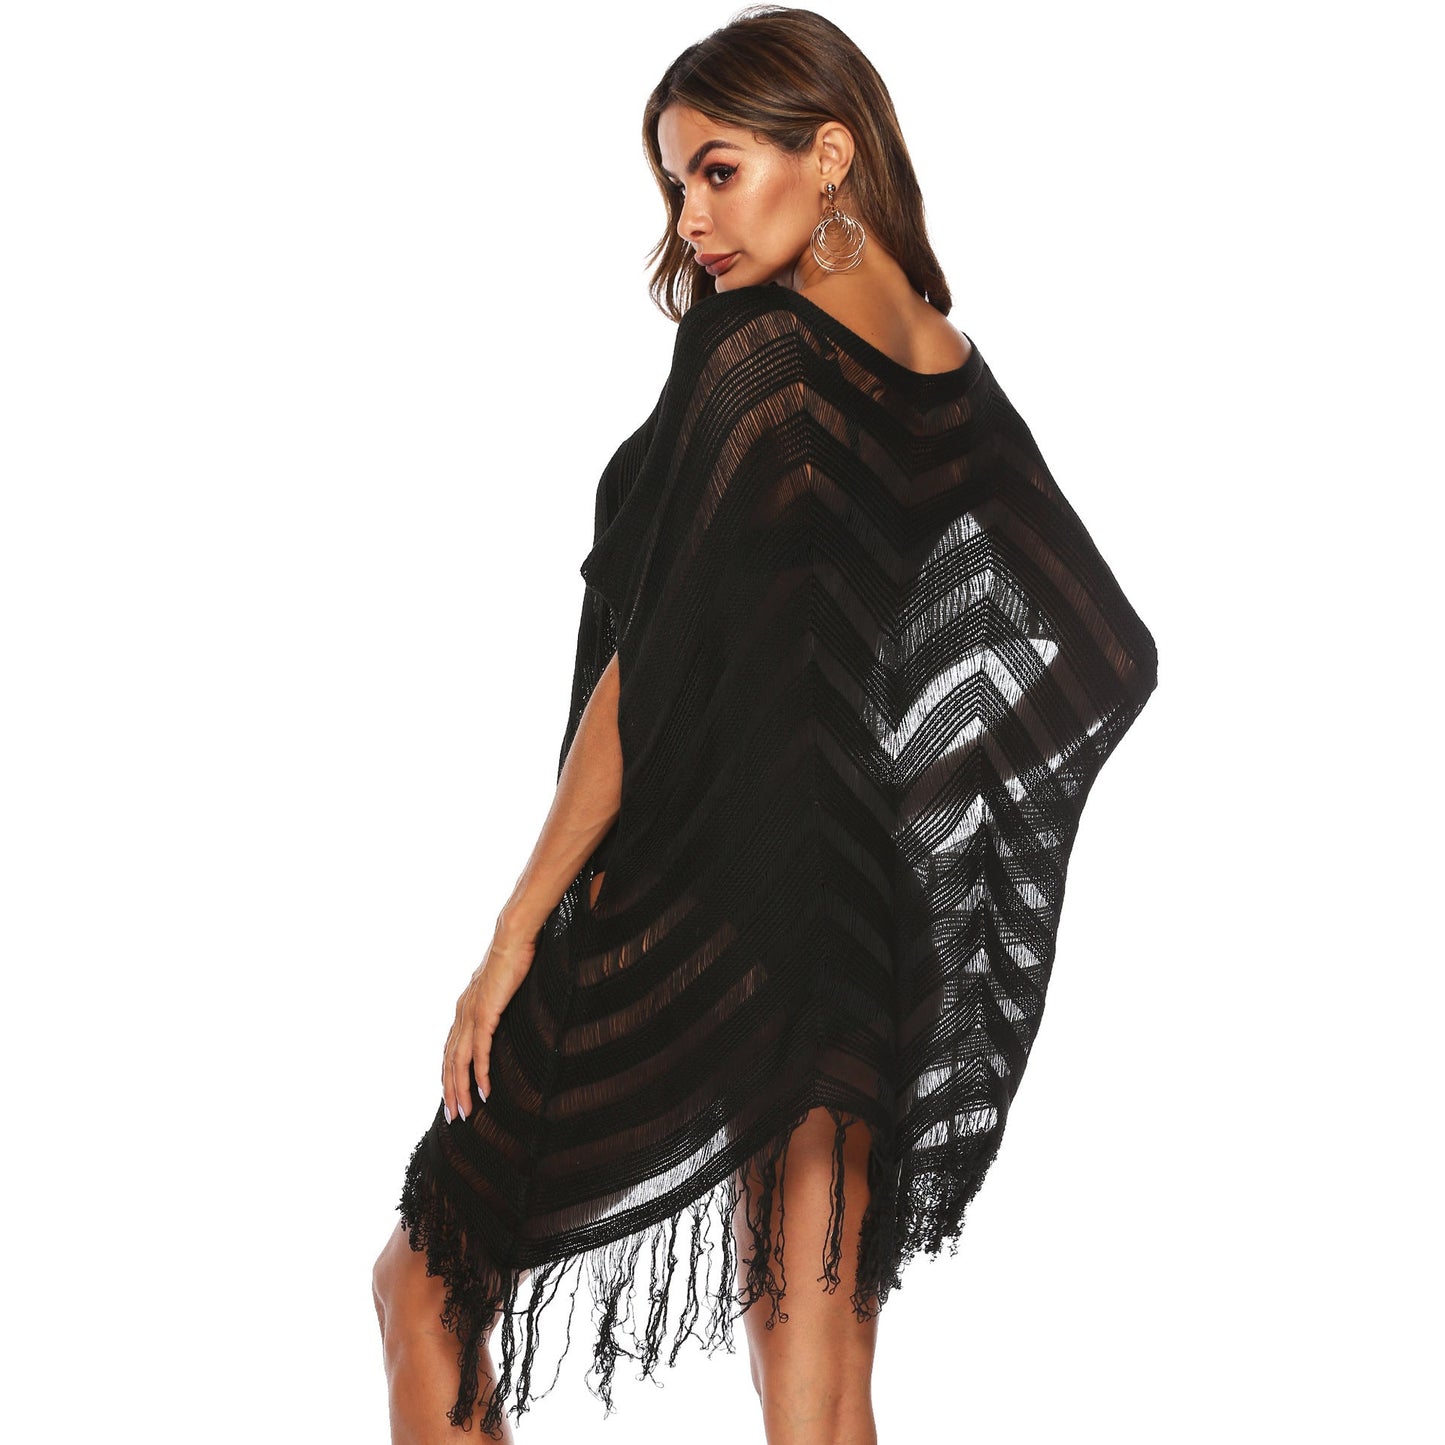 Black Off The Shoulder Tassels Summer Beach Cover Ups-Swimwear-Black-One Size-Free Shipping at meselling99